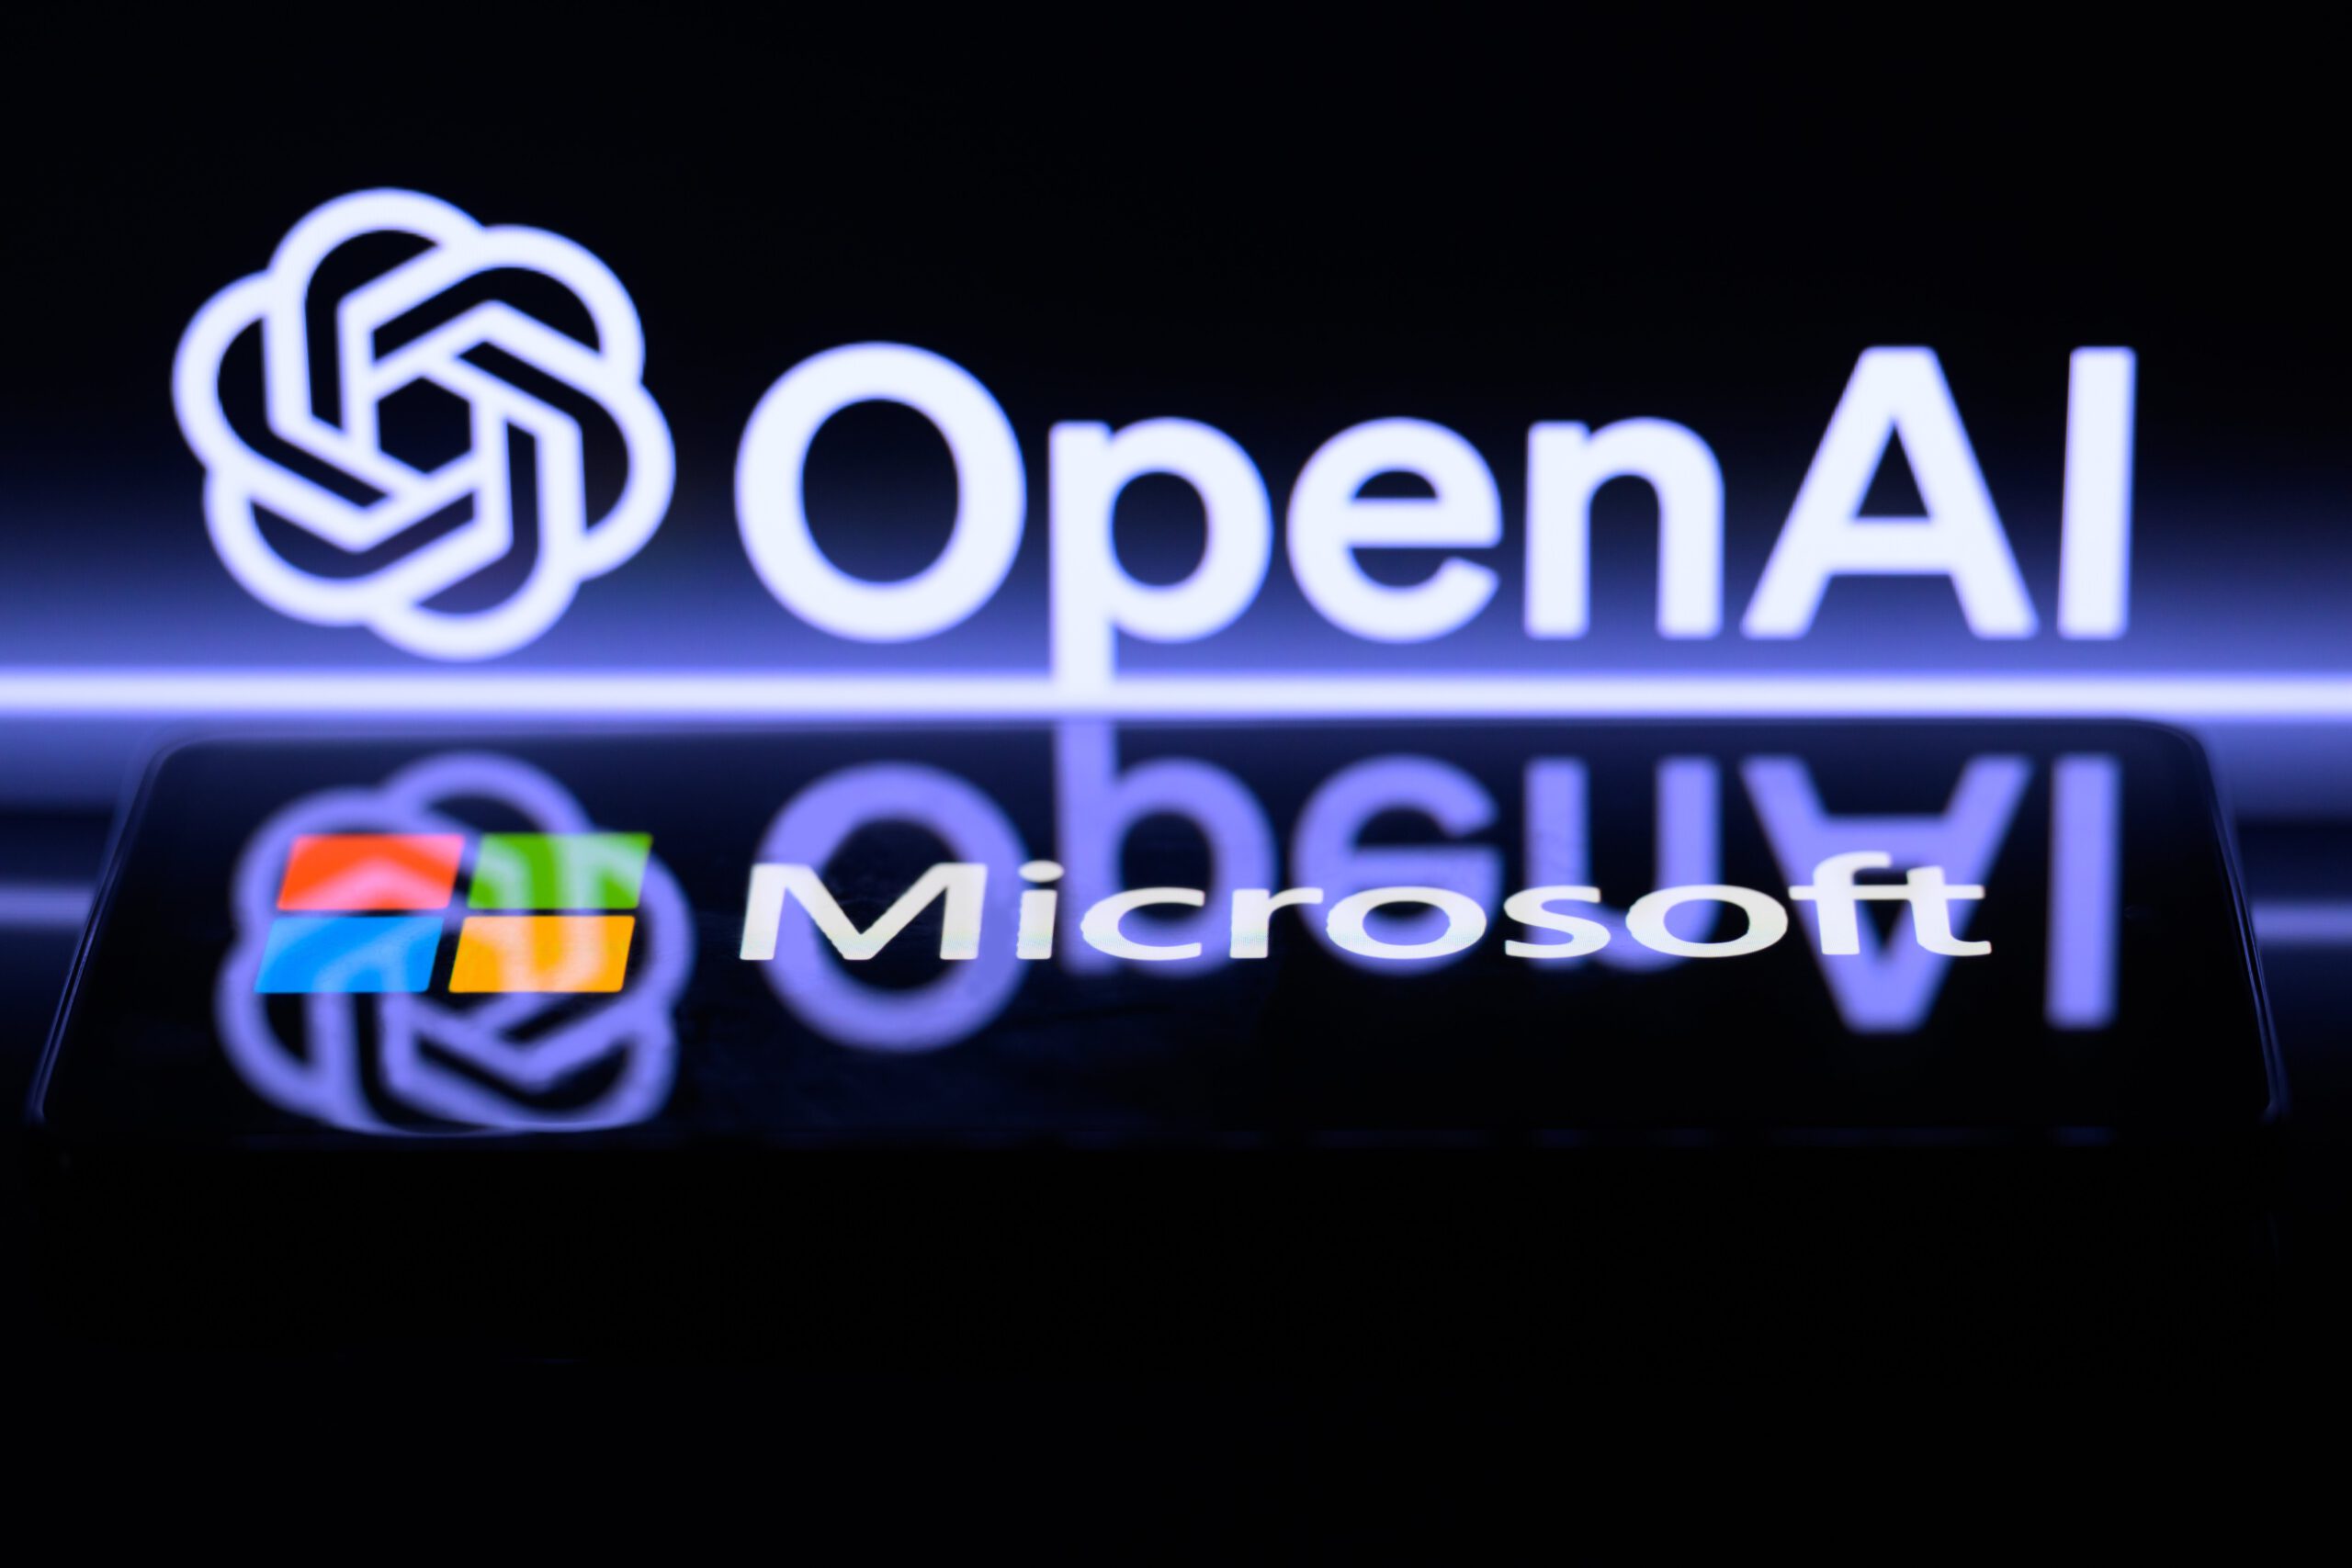 The OpenAI and Microsoft logos reflecting each other on a dark screen.